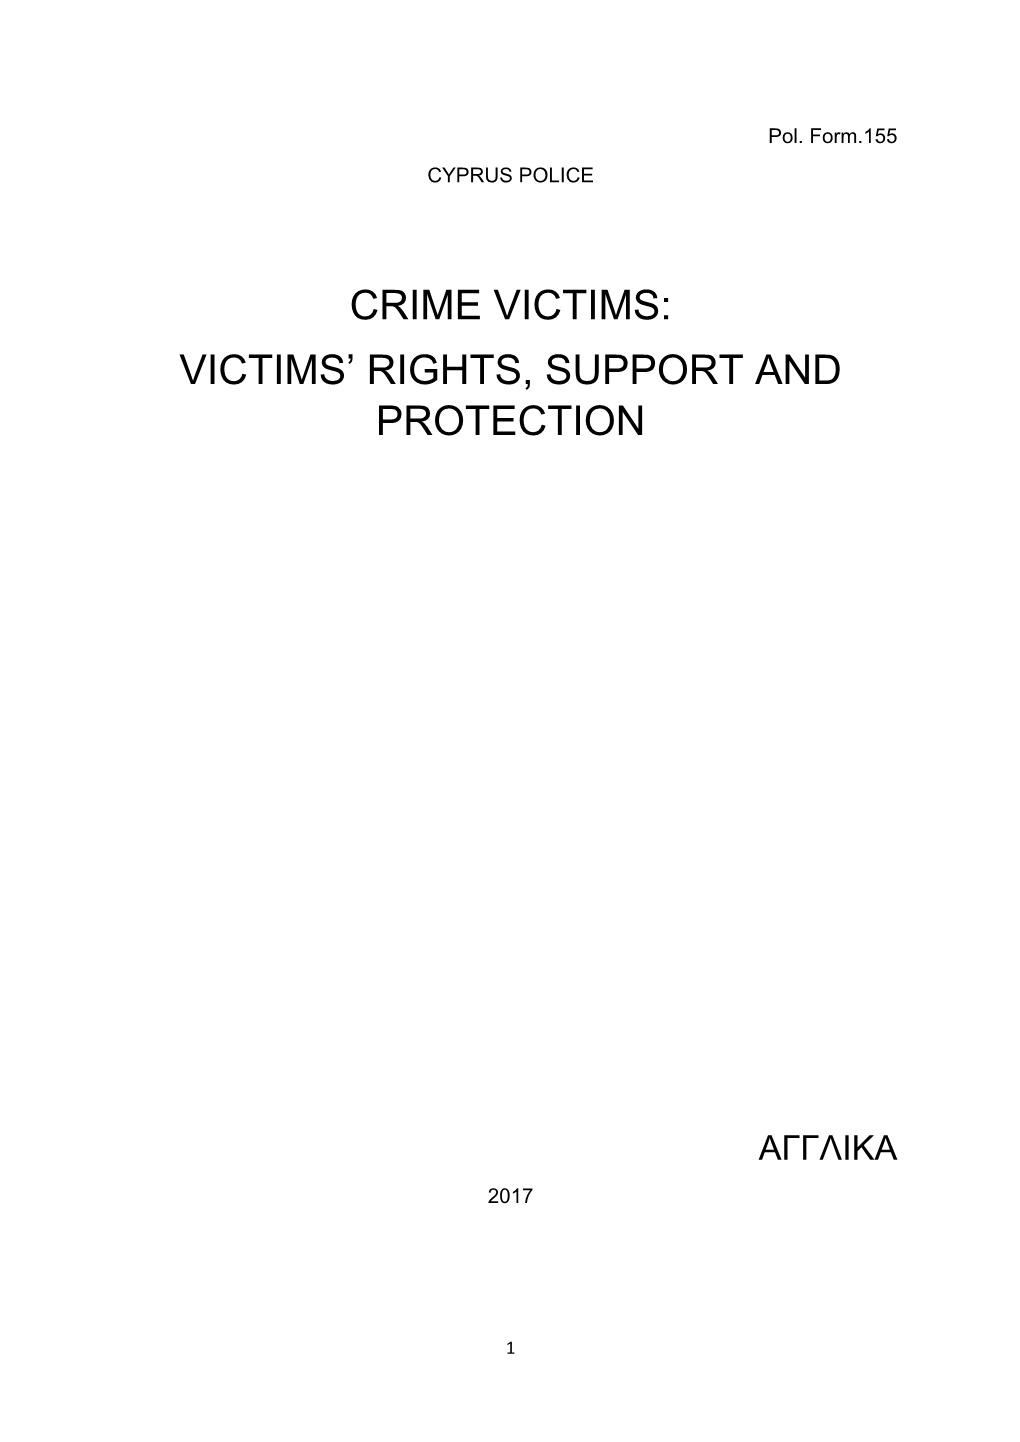 Crime Victims: Victims' Rights, Support and Protection